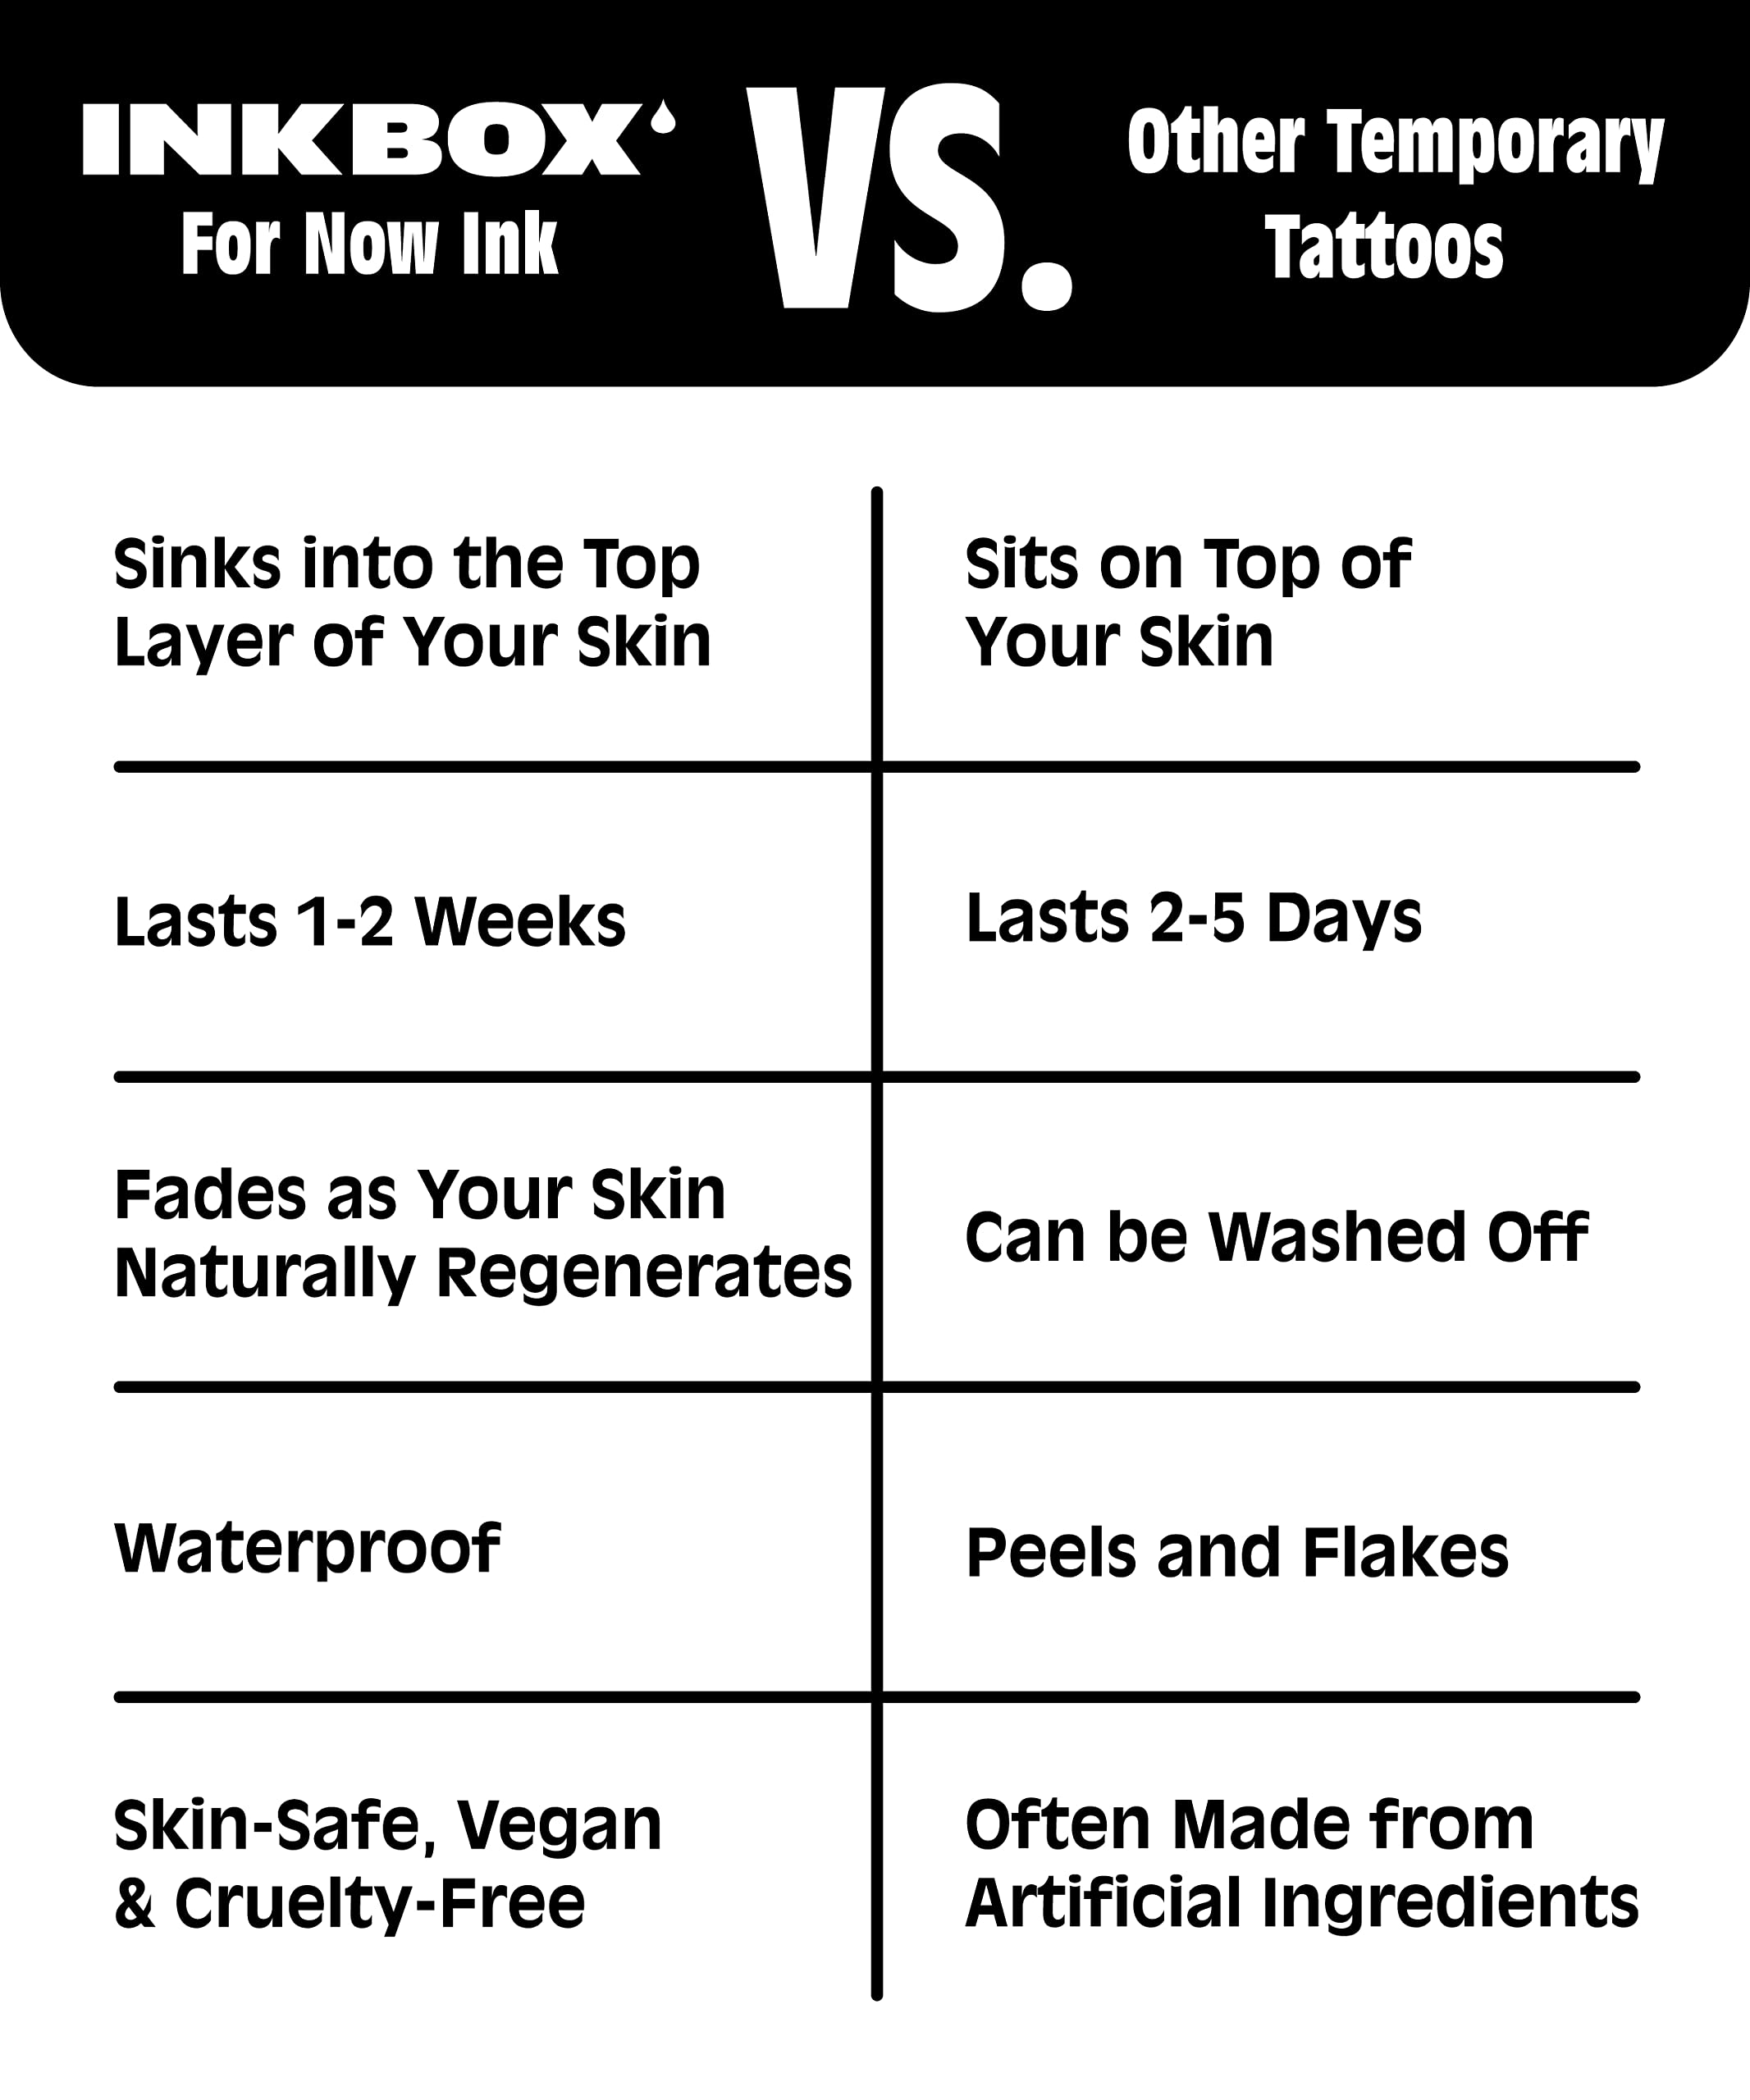 Inkbox Temporary Tattoos, Semi-Permanent Tattoo, One Premium Easy Long Lasting, Water-Resistant Temp Tattoo with For Now Ink - Lasts 1-2 Weeks, Stego, 1 x 1 in